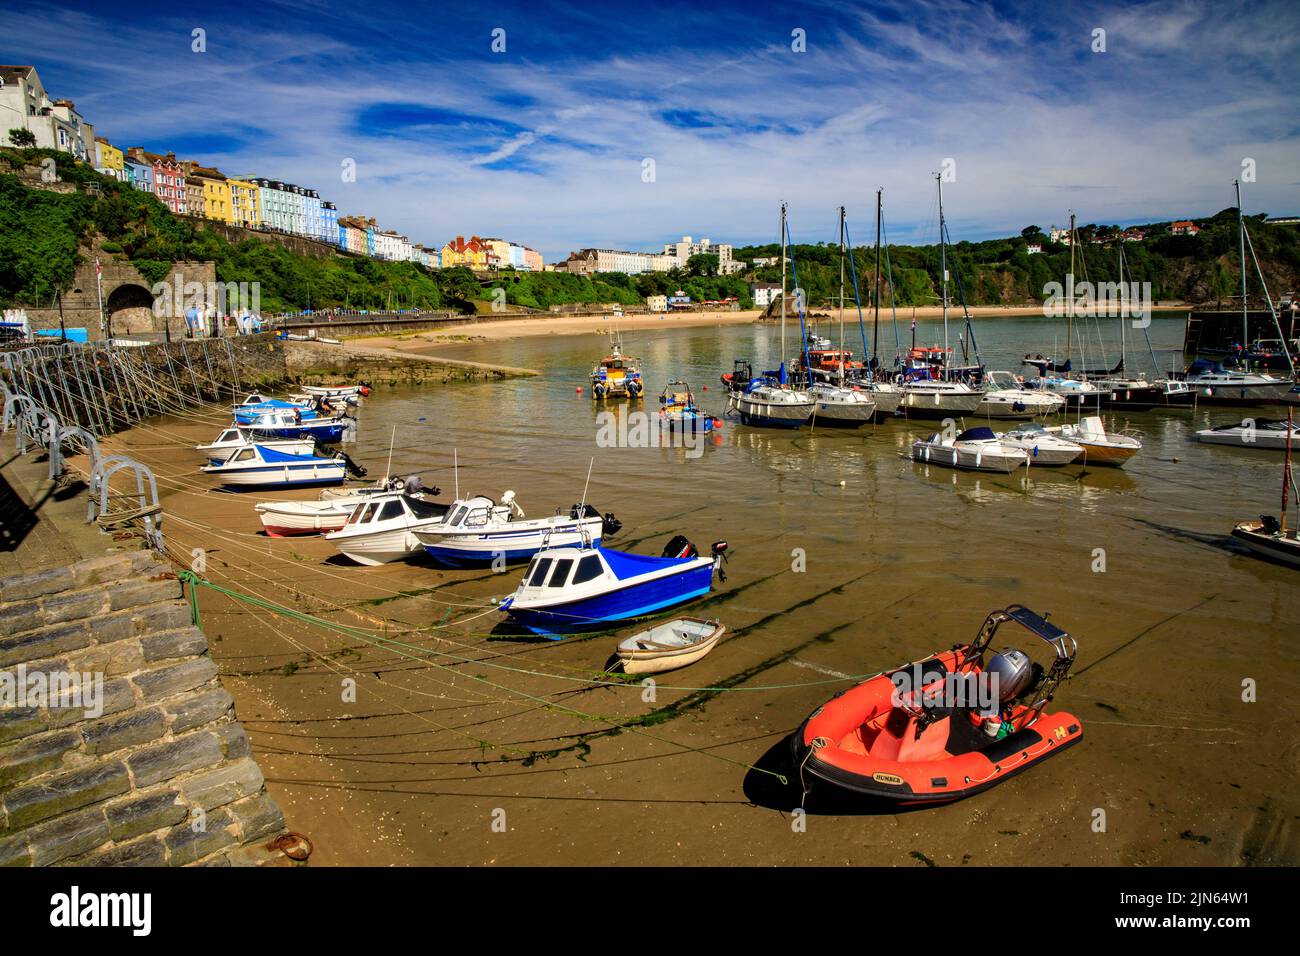 The picturesque sheltered harbour is overlooked by rows of colourful houses in Tenby, Pembrokeshire, Wales, UK Stock Photo